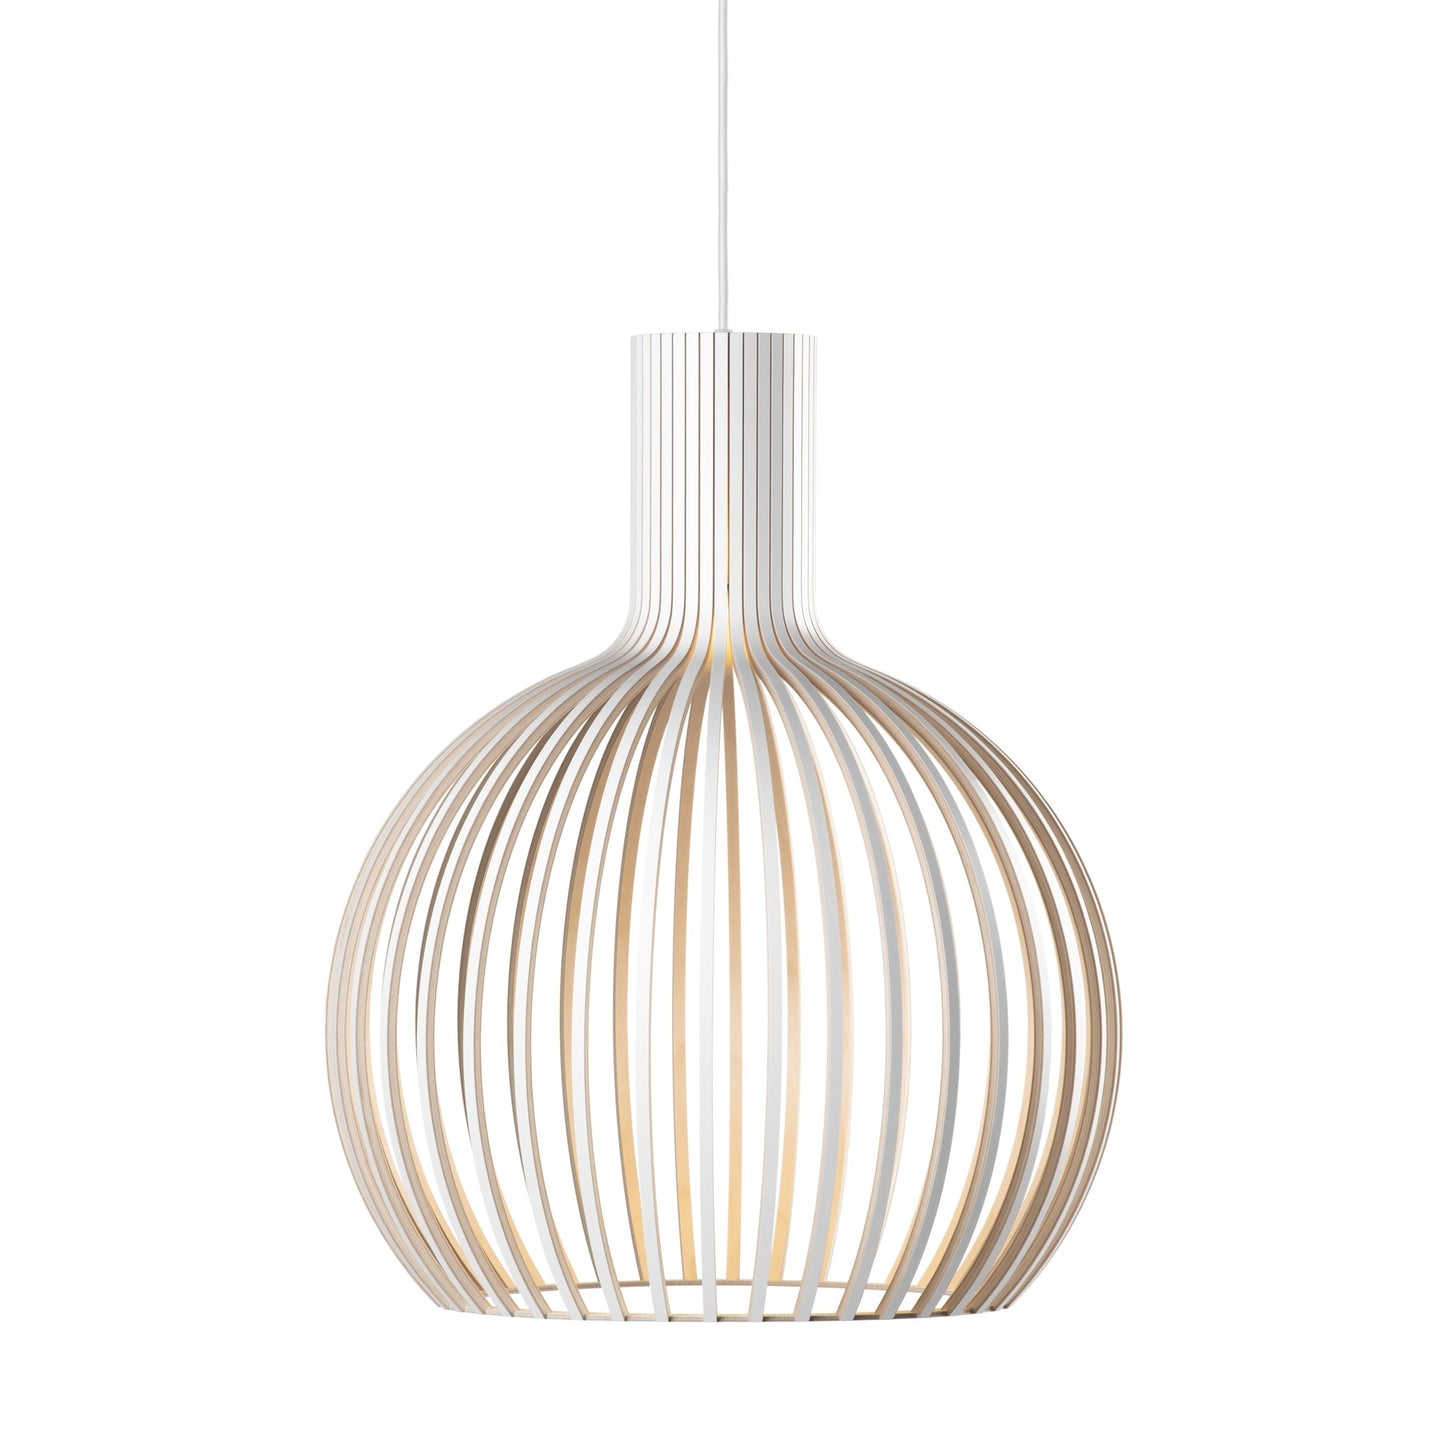 Octo 4241 Pendant Lamp by Secto #White